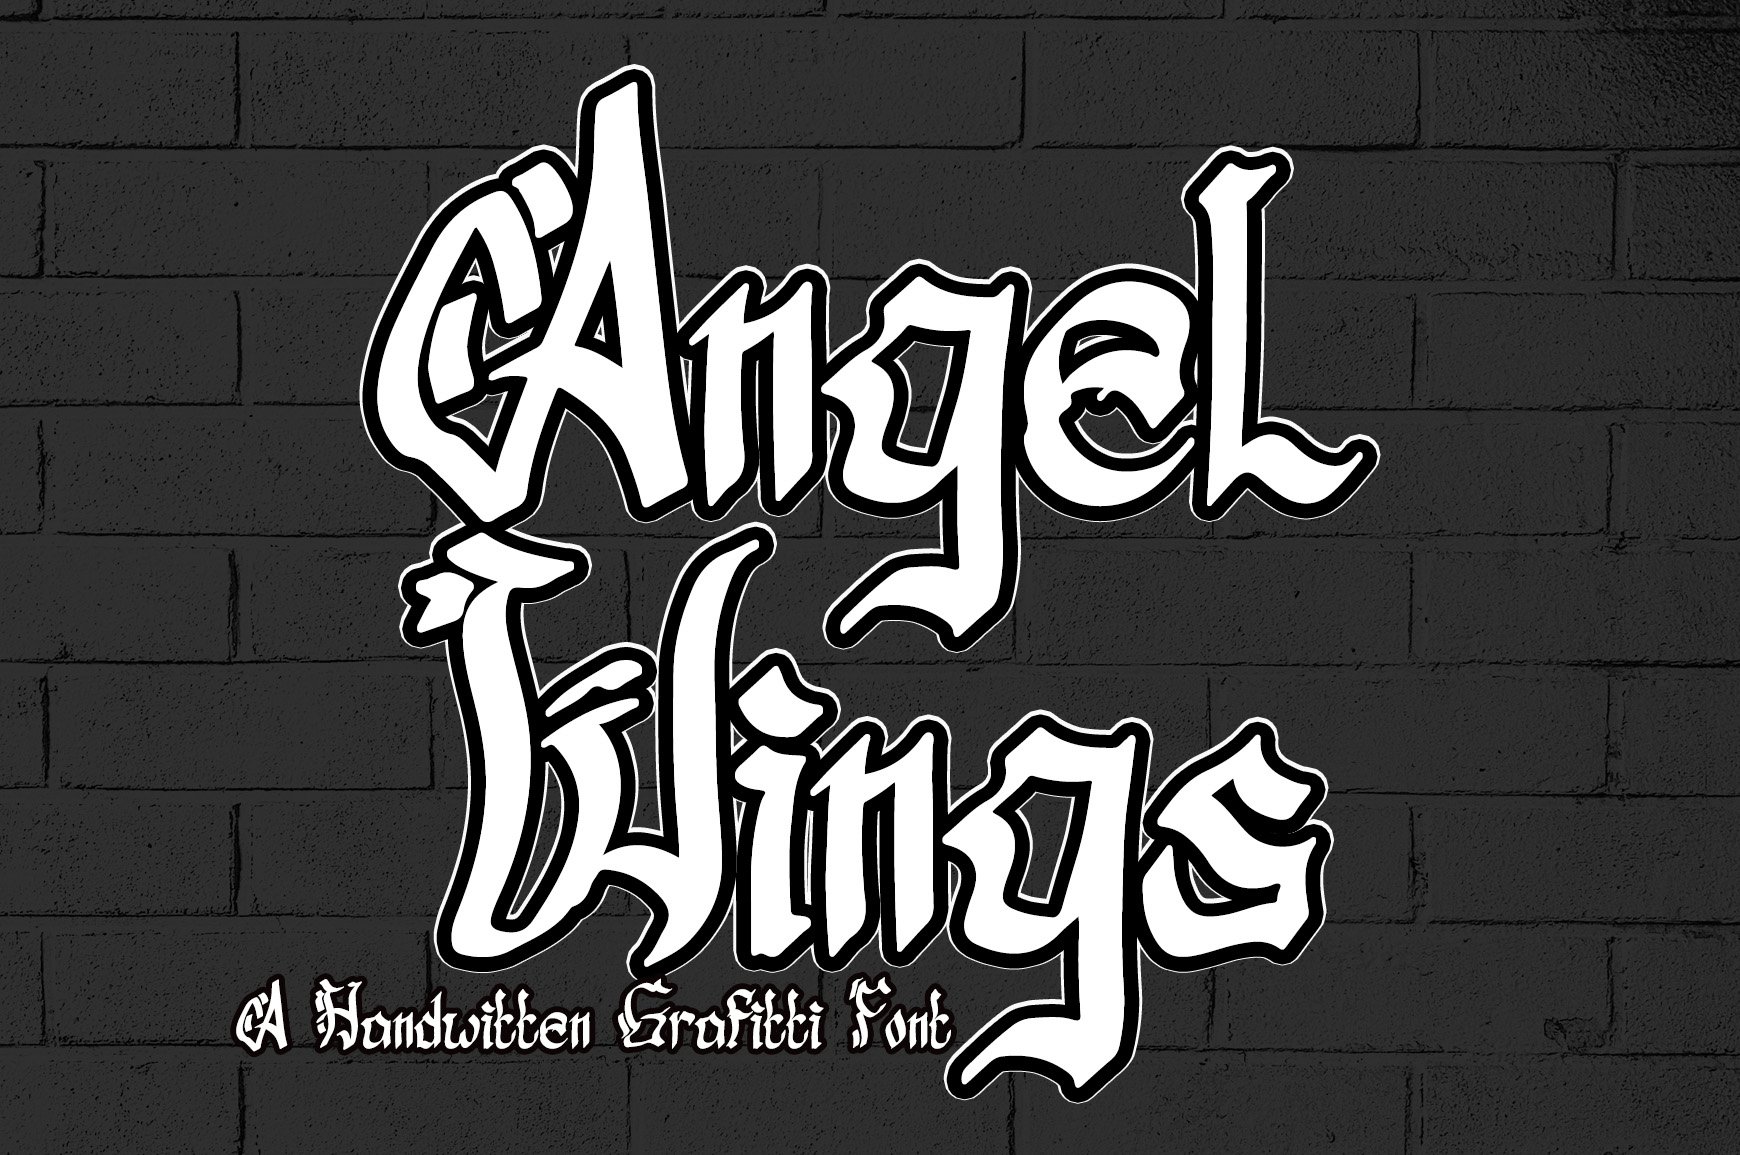 Angel Wings cover image.